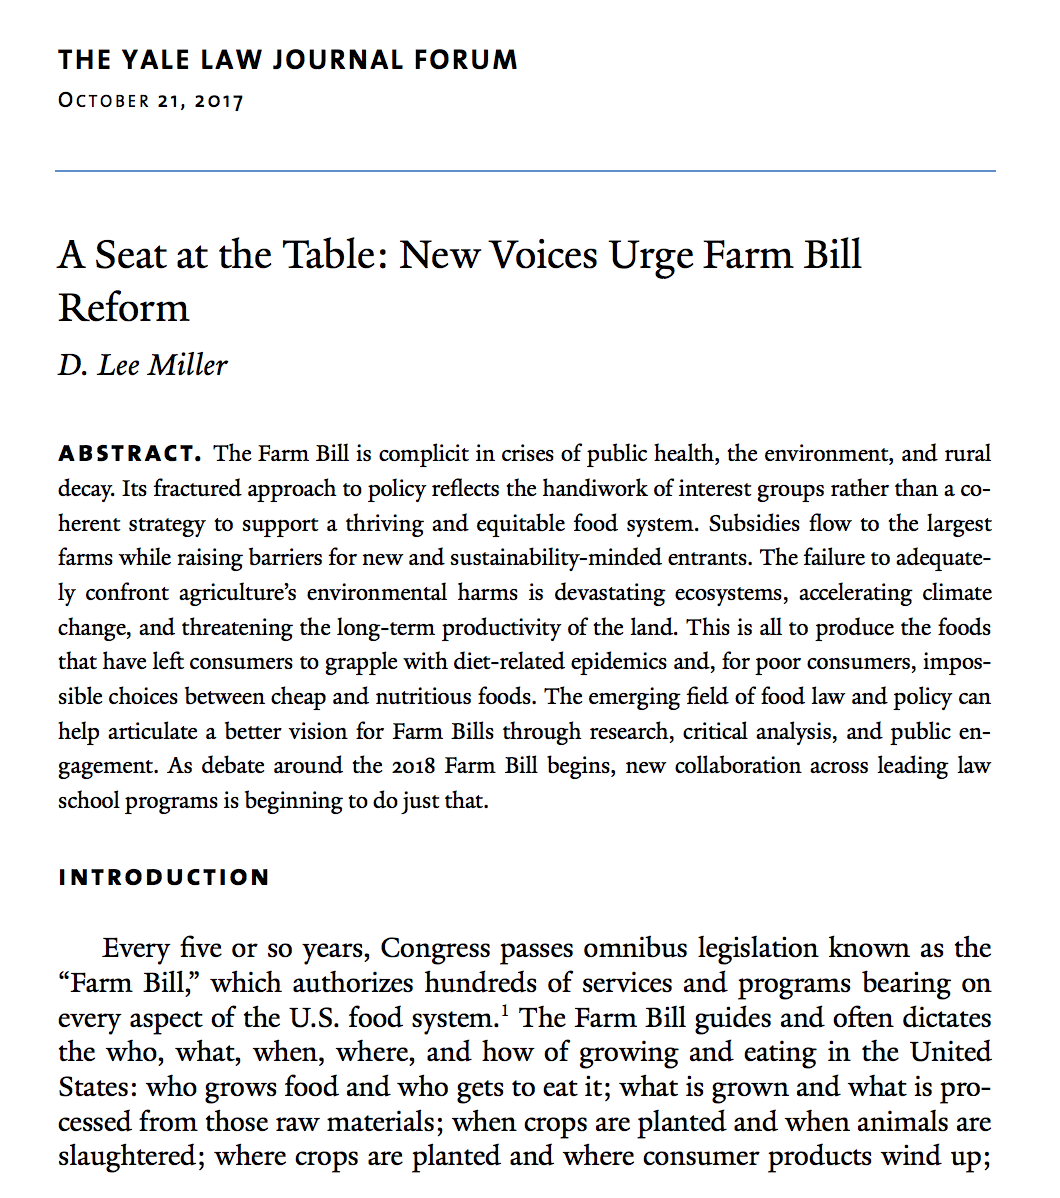 A Seat at the Table: New Voices Urge Farm Bill Reform